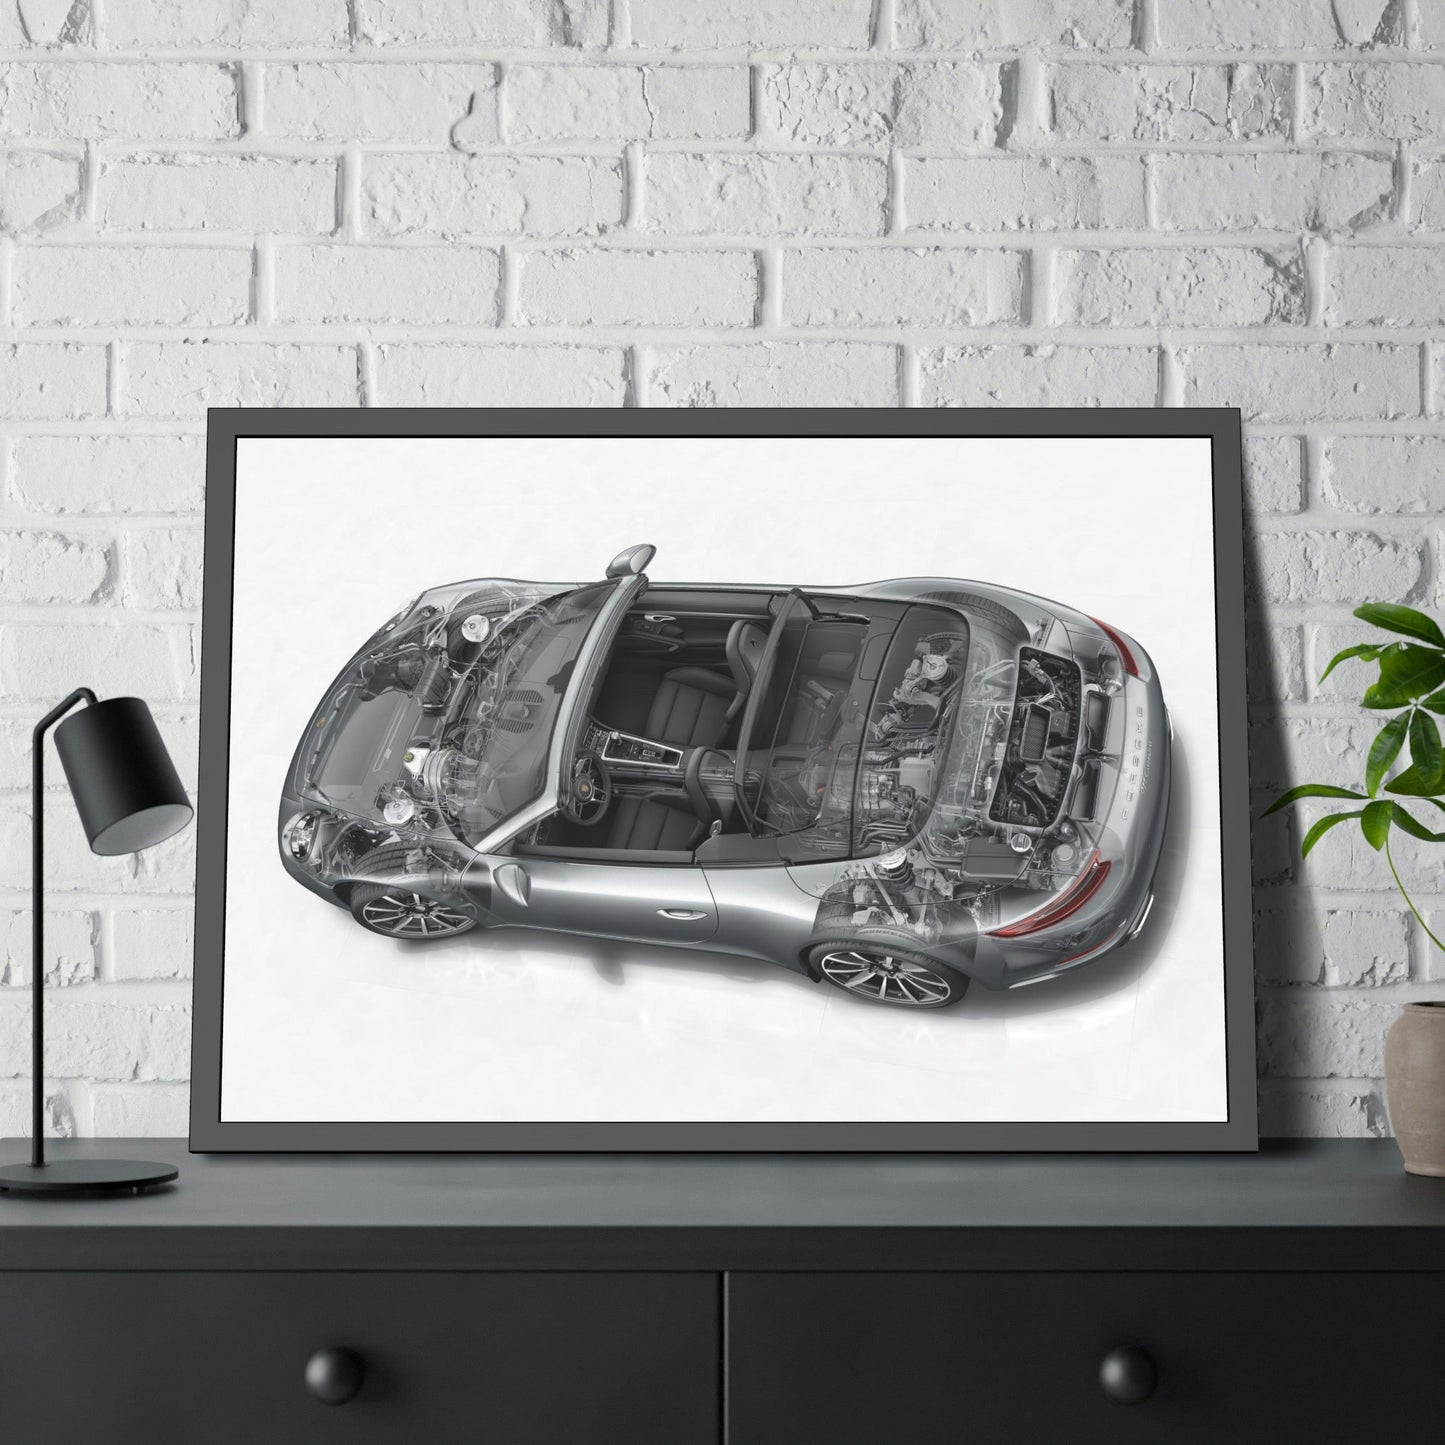 Porsche's Roaring Legacy: A Canvas Print Capturing the Iconic Sports Car